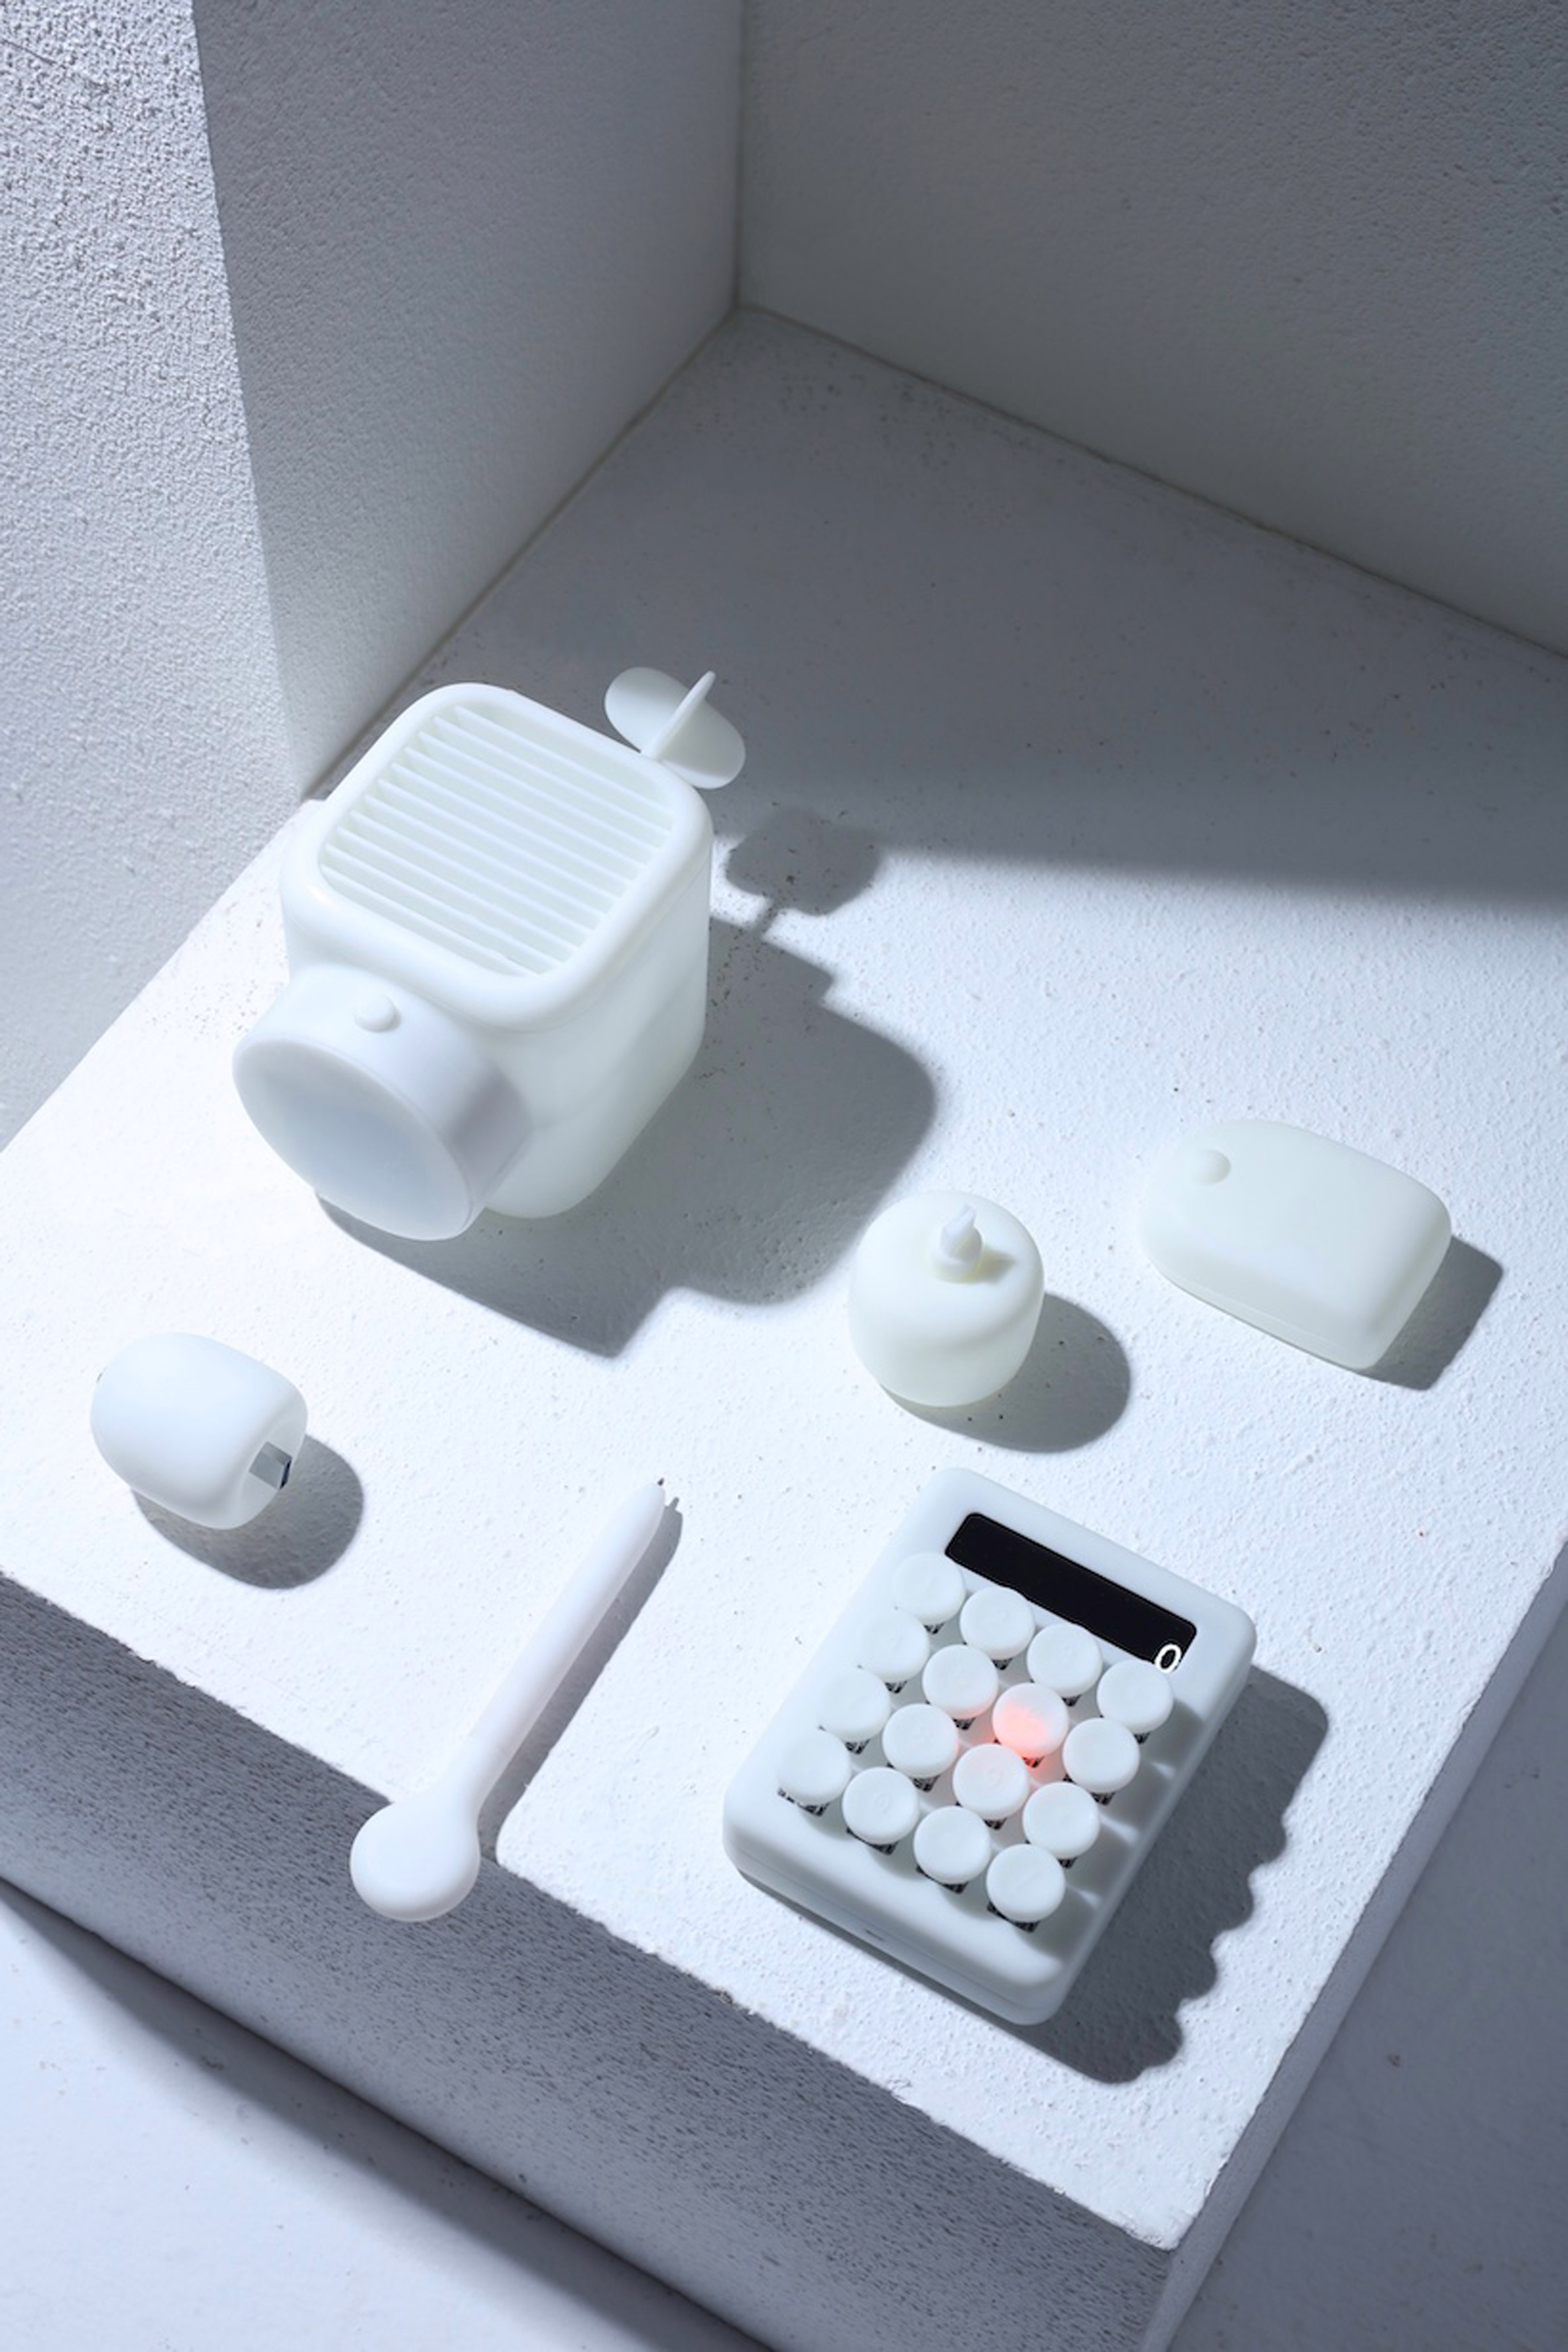 Keyi Chen's desk accessories encourage us to play whilst we work